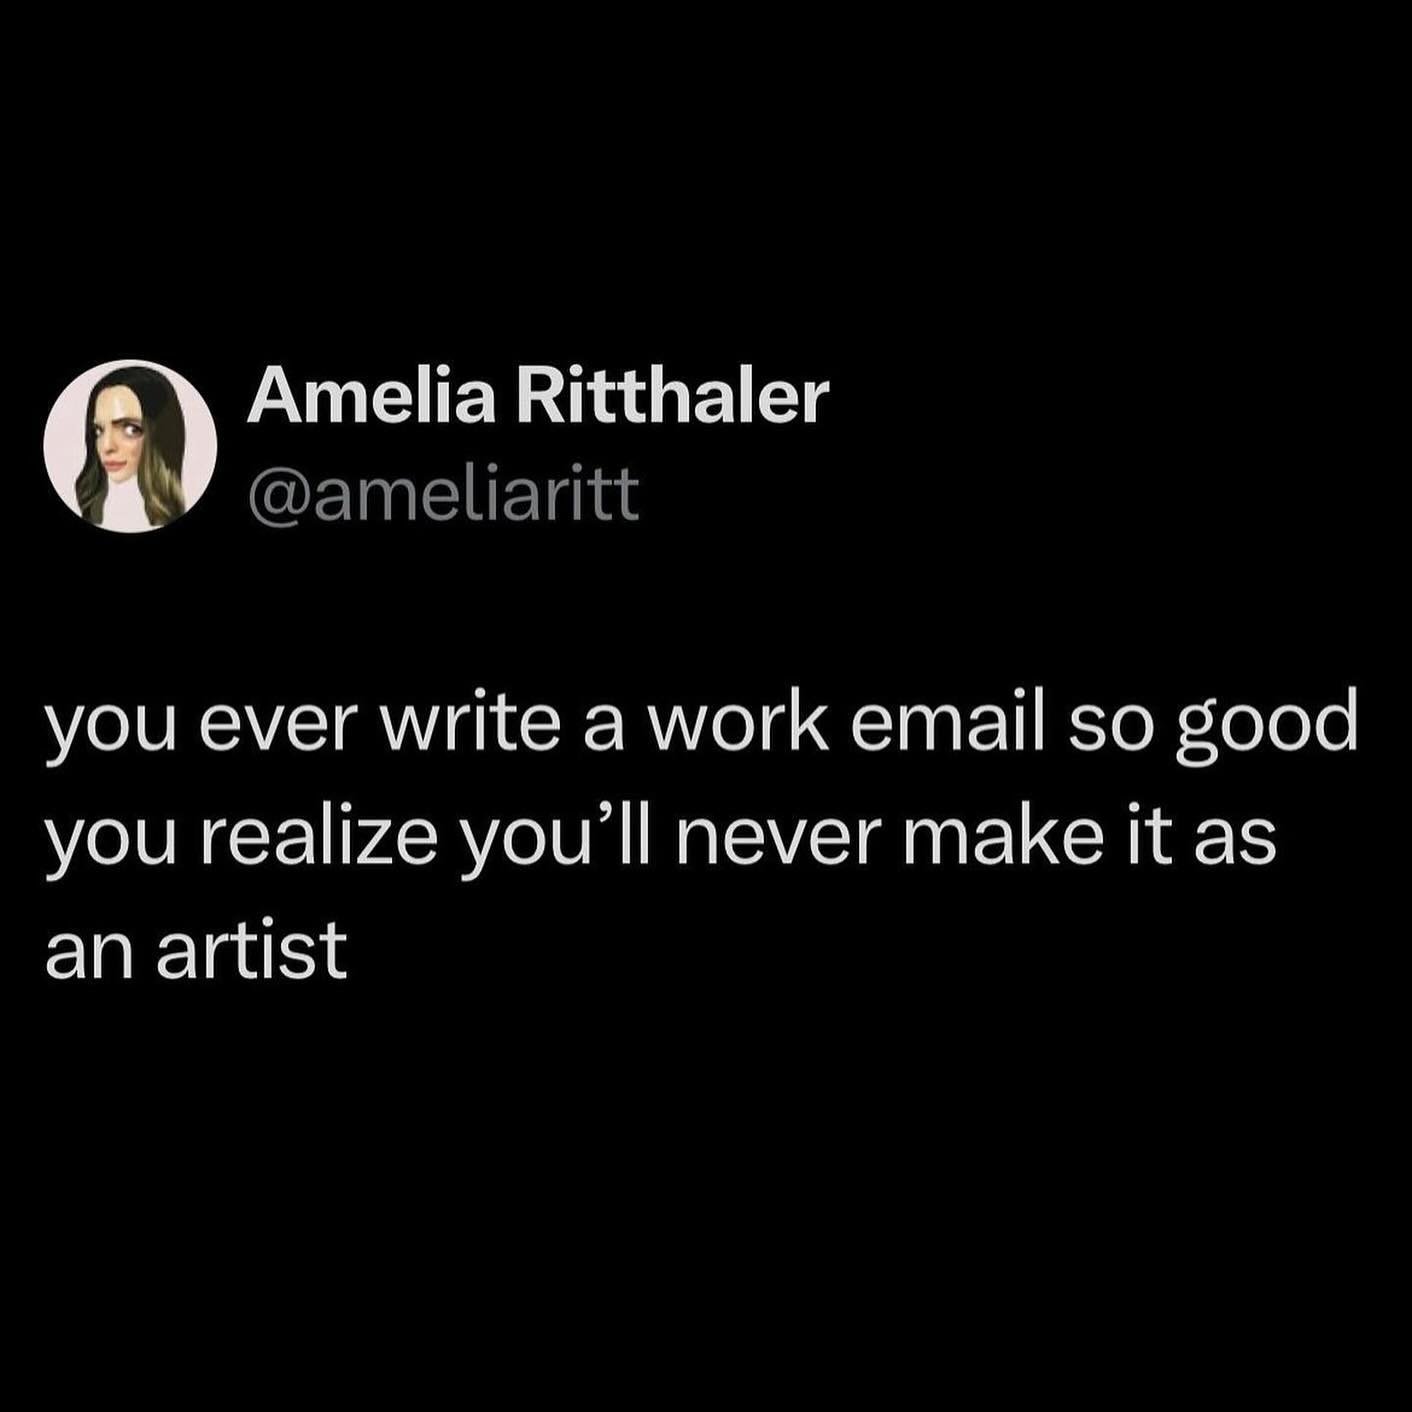 May you successfully begin easing out of the work week Thursday at 10am, just as the goob lorb intended. 

#memes #funny #work #email #hopethisemailfindsyouwell #computer #coworkers #correctspelling #9to5 #dadsgarageatl